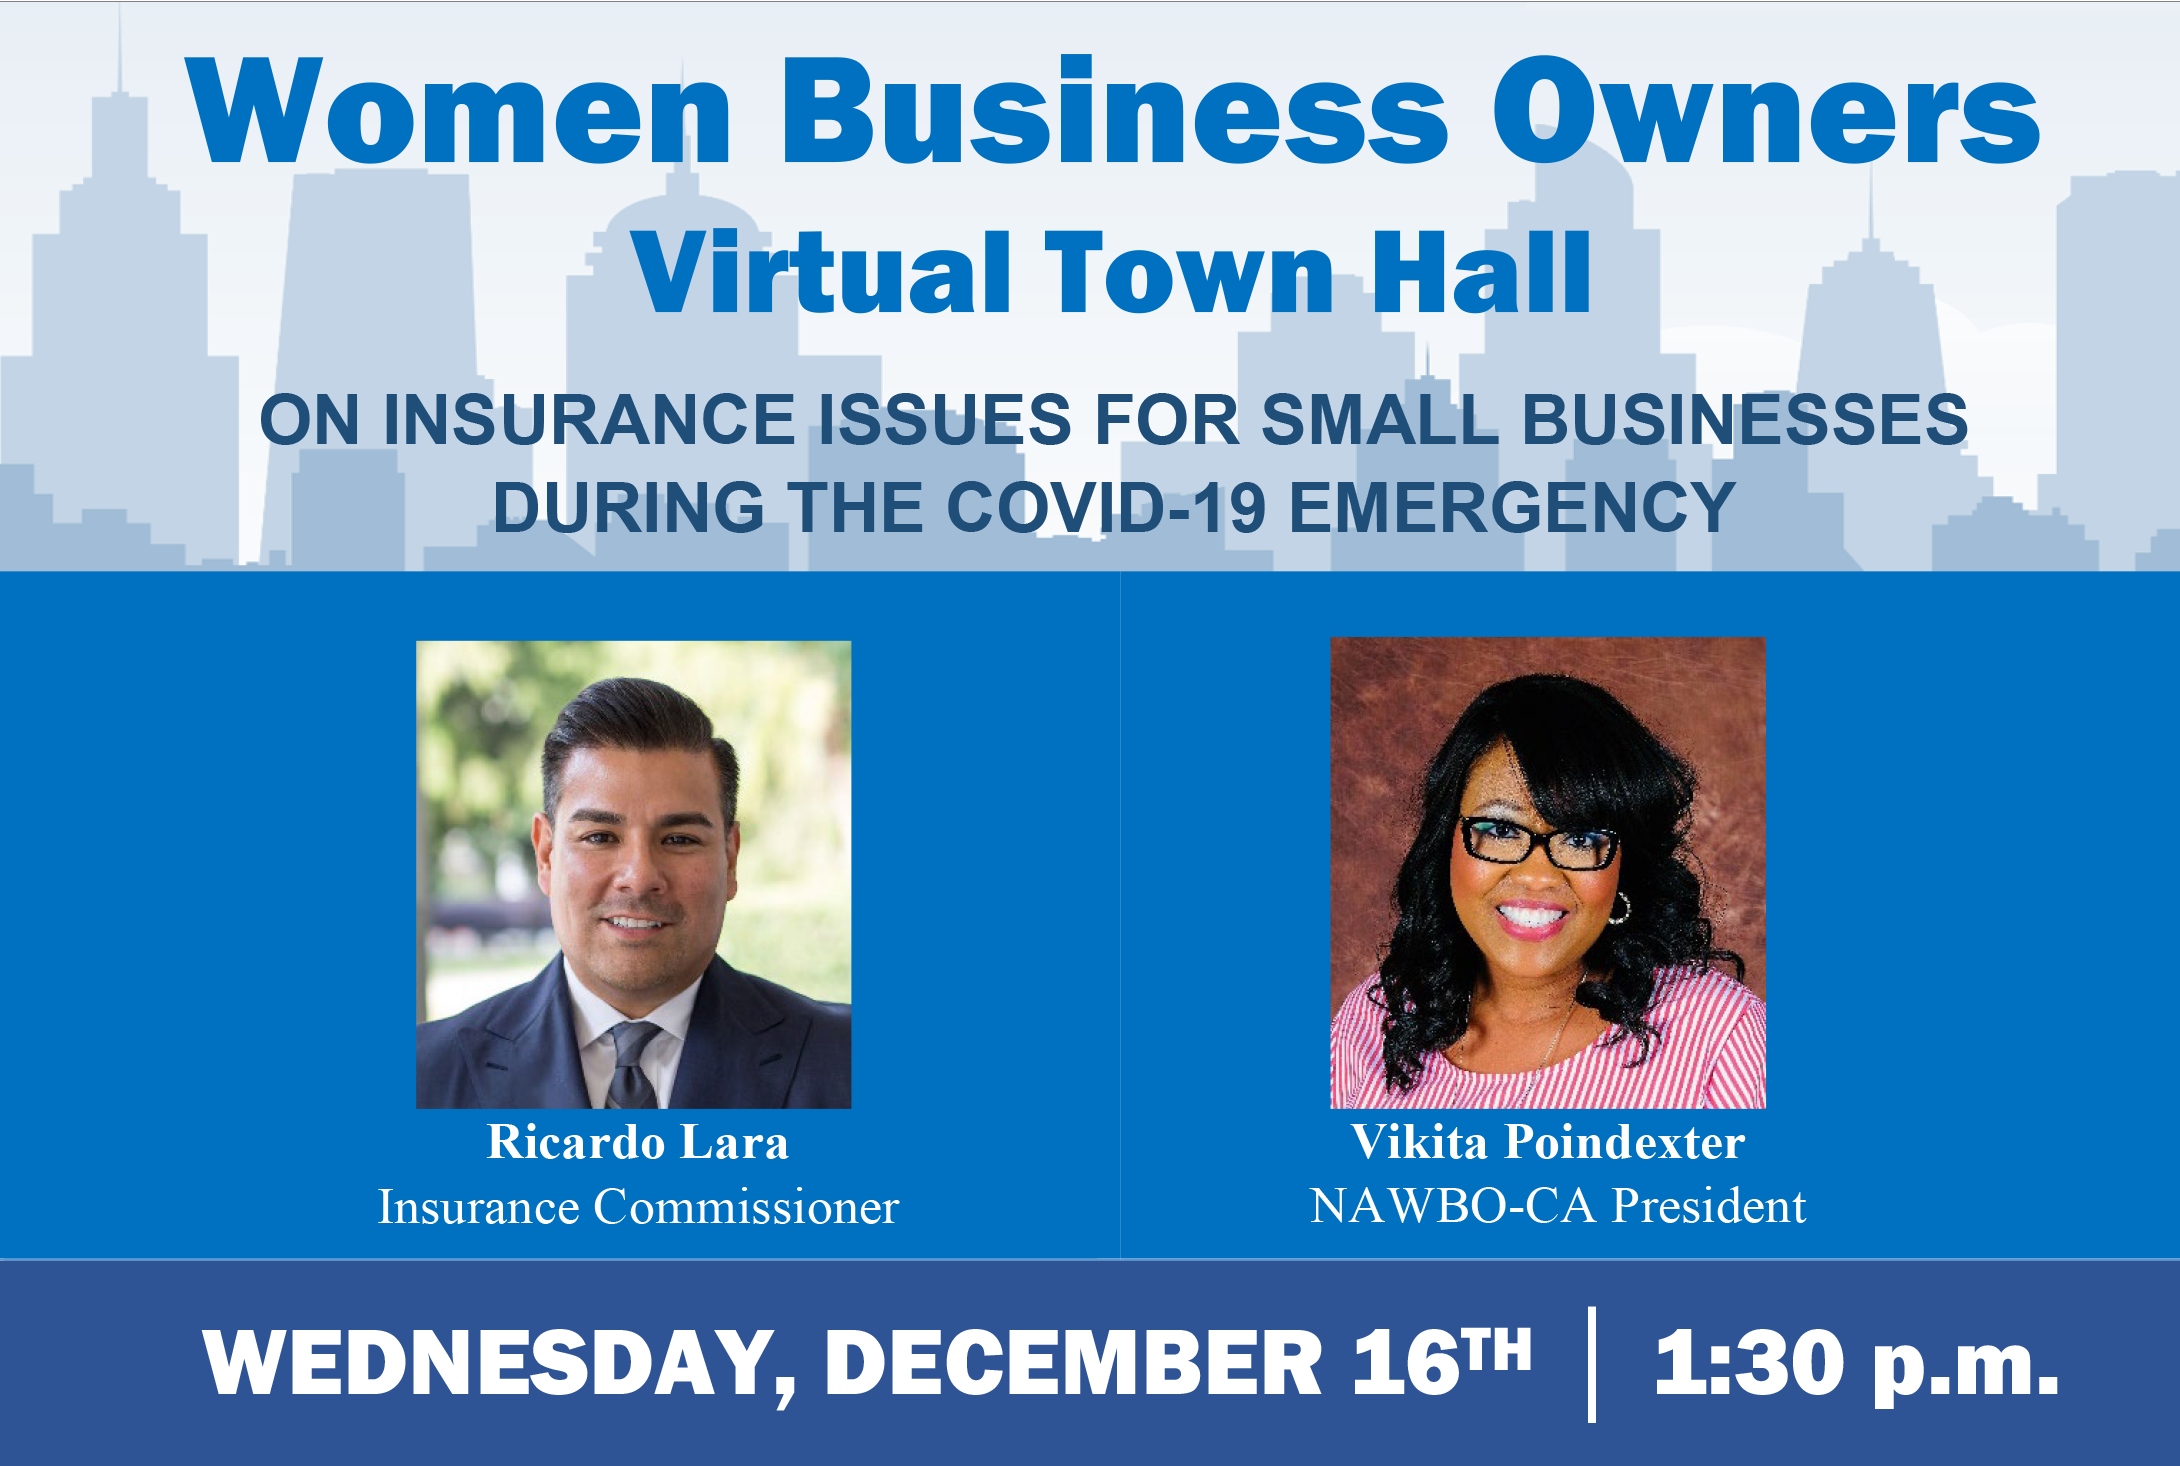 Women Business Owners Virtual Town Hall ON INSURANCE ISSUES FOR SMALL BUSINESSES DURING THE COVID-19 EMERGENCY 